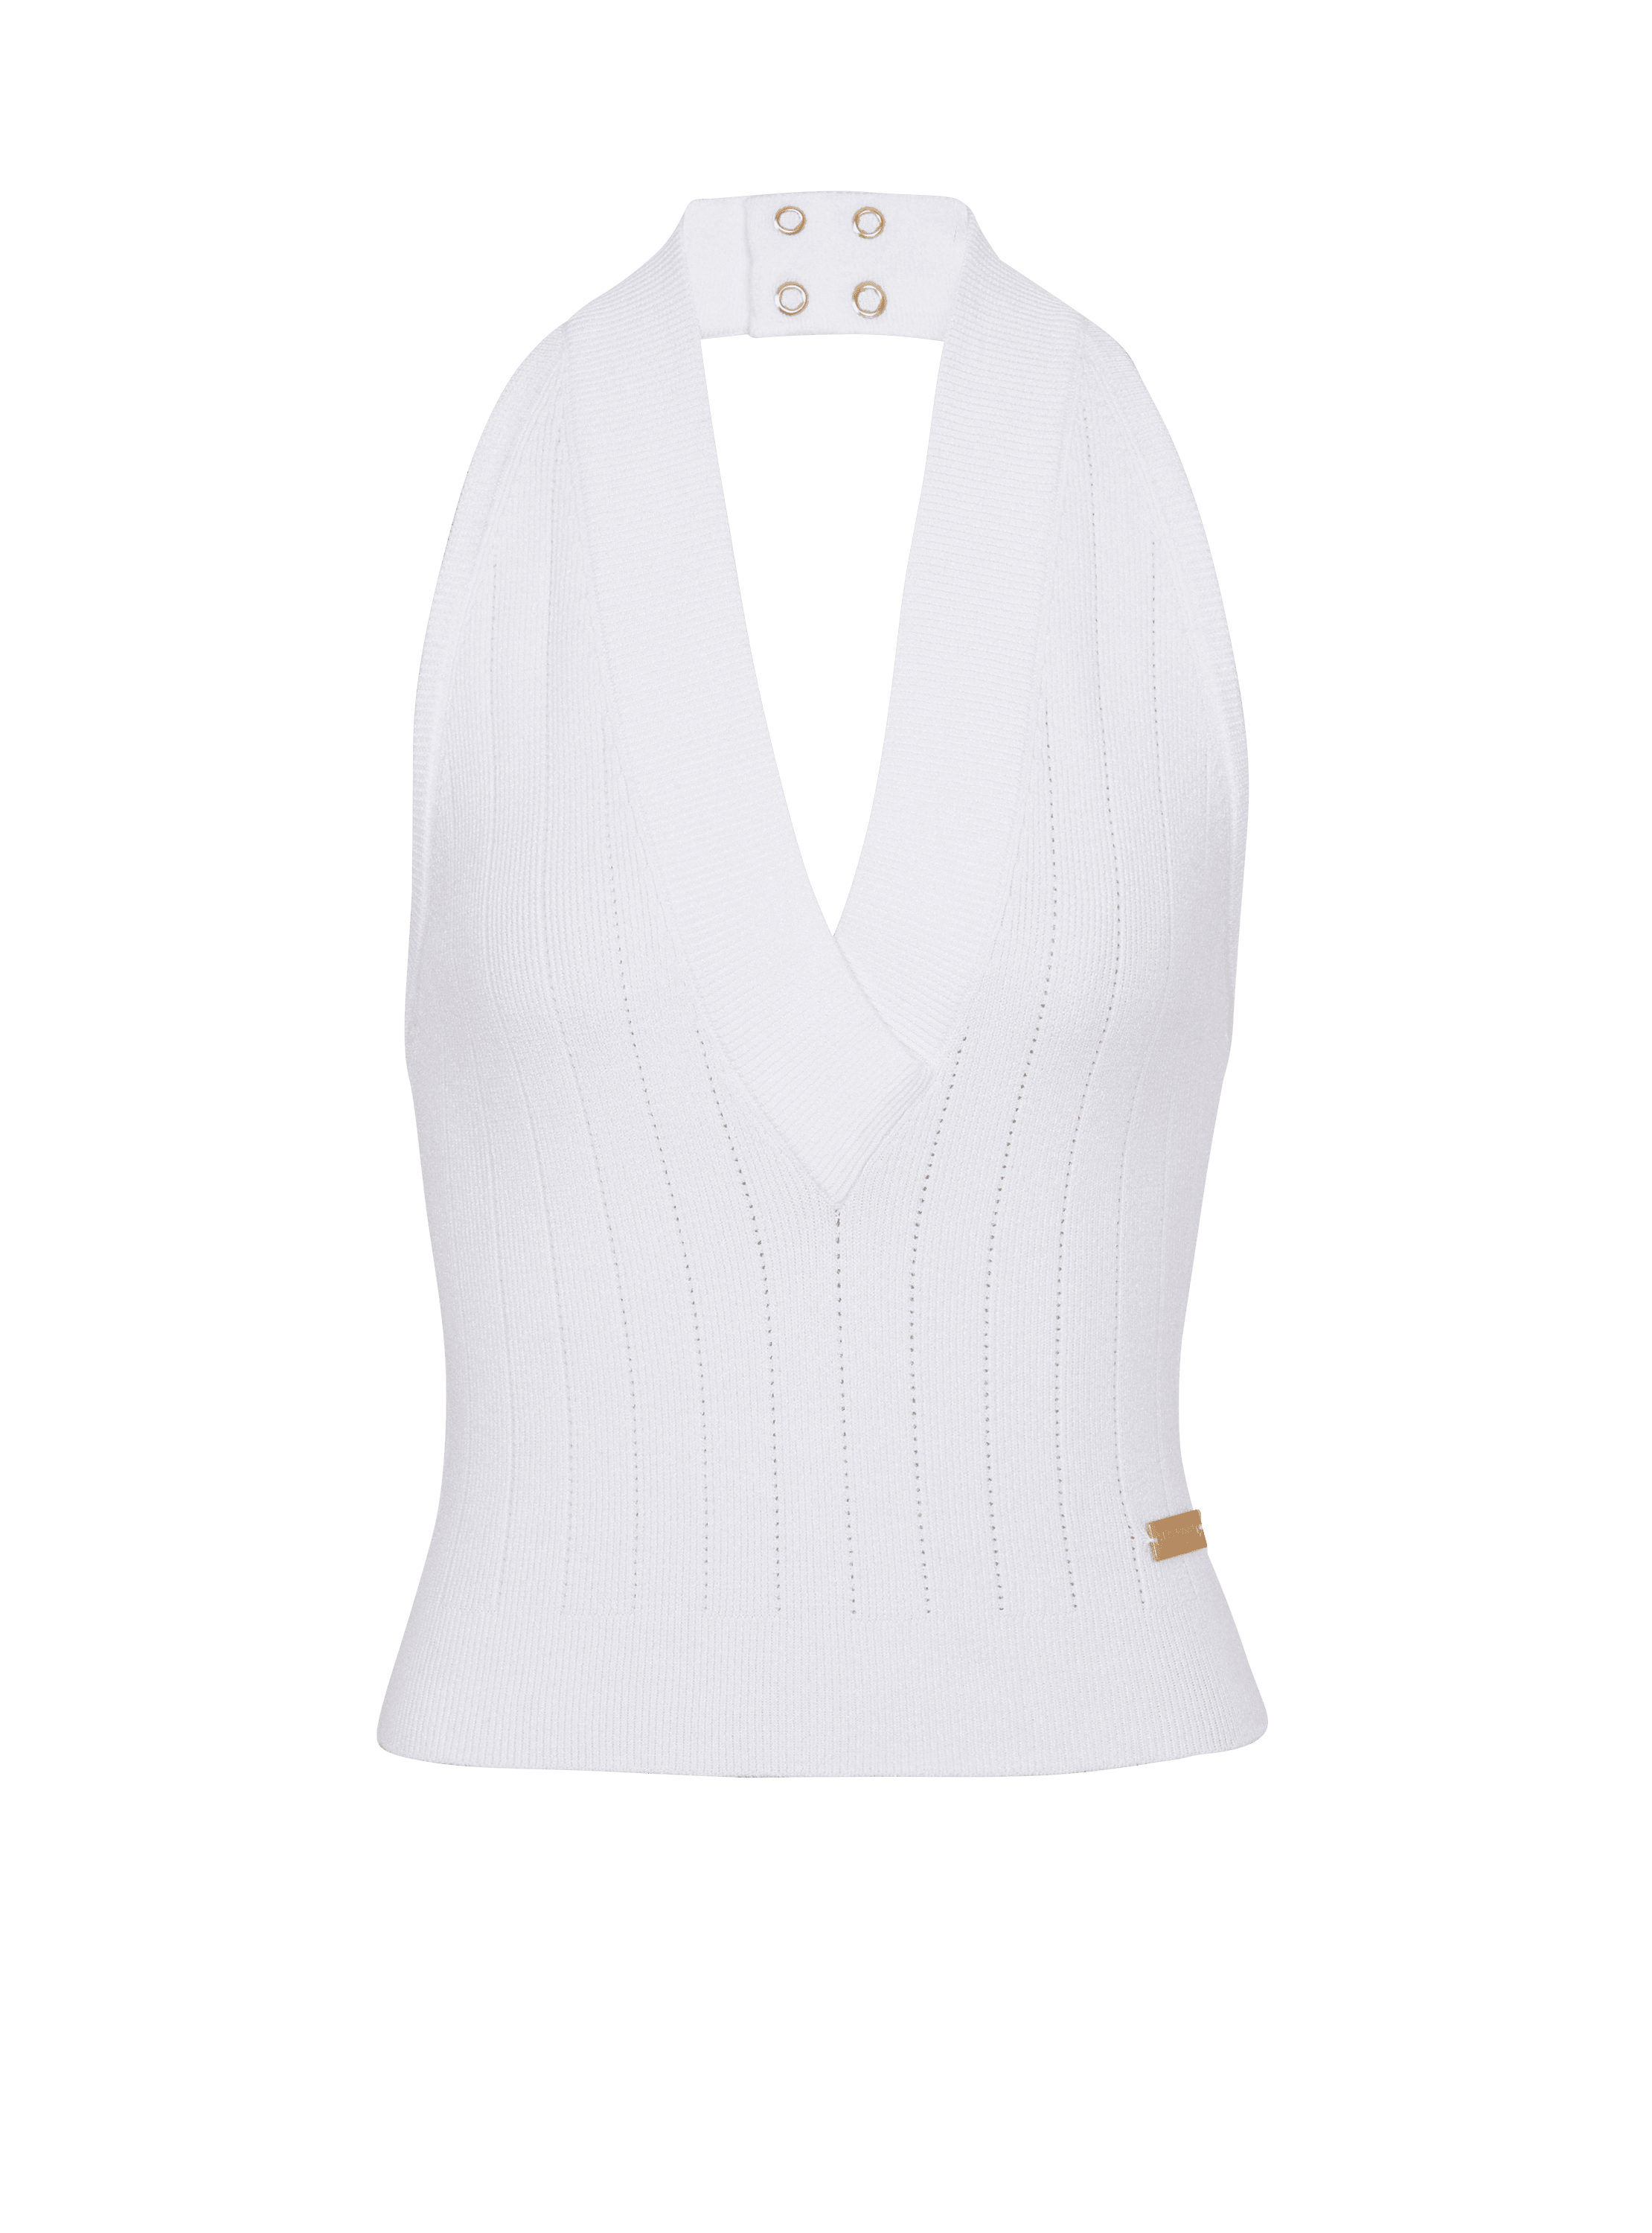 Knit backless top, white, hi-res